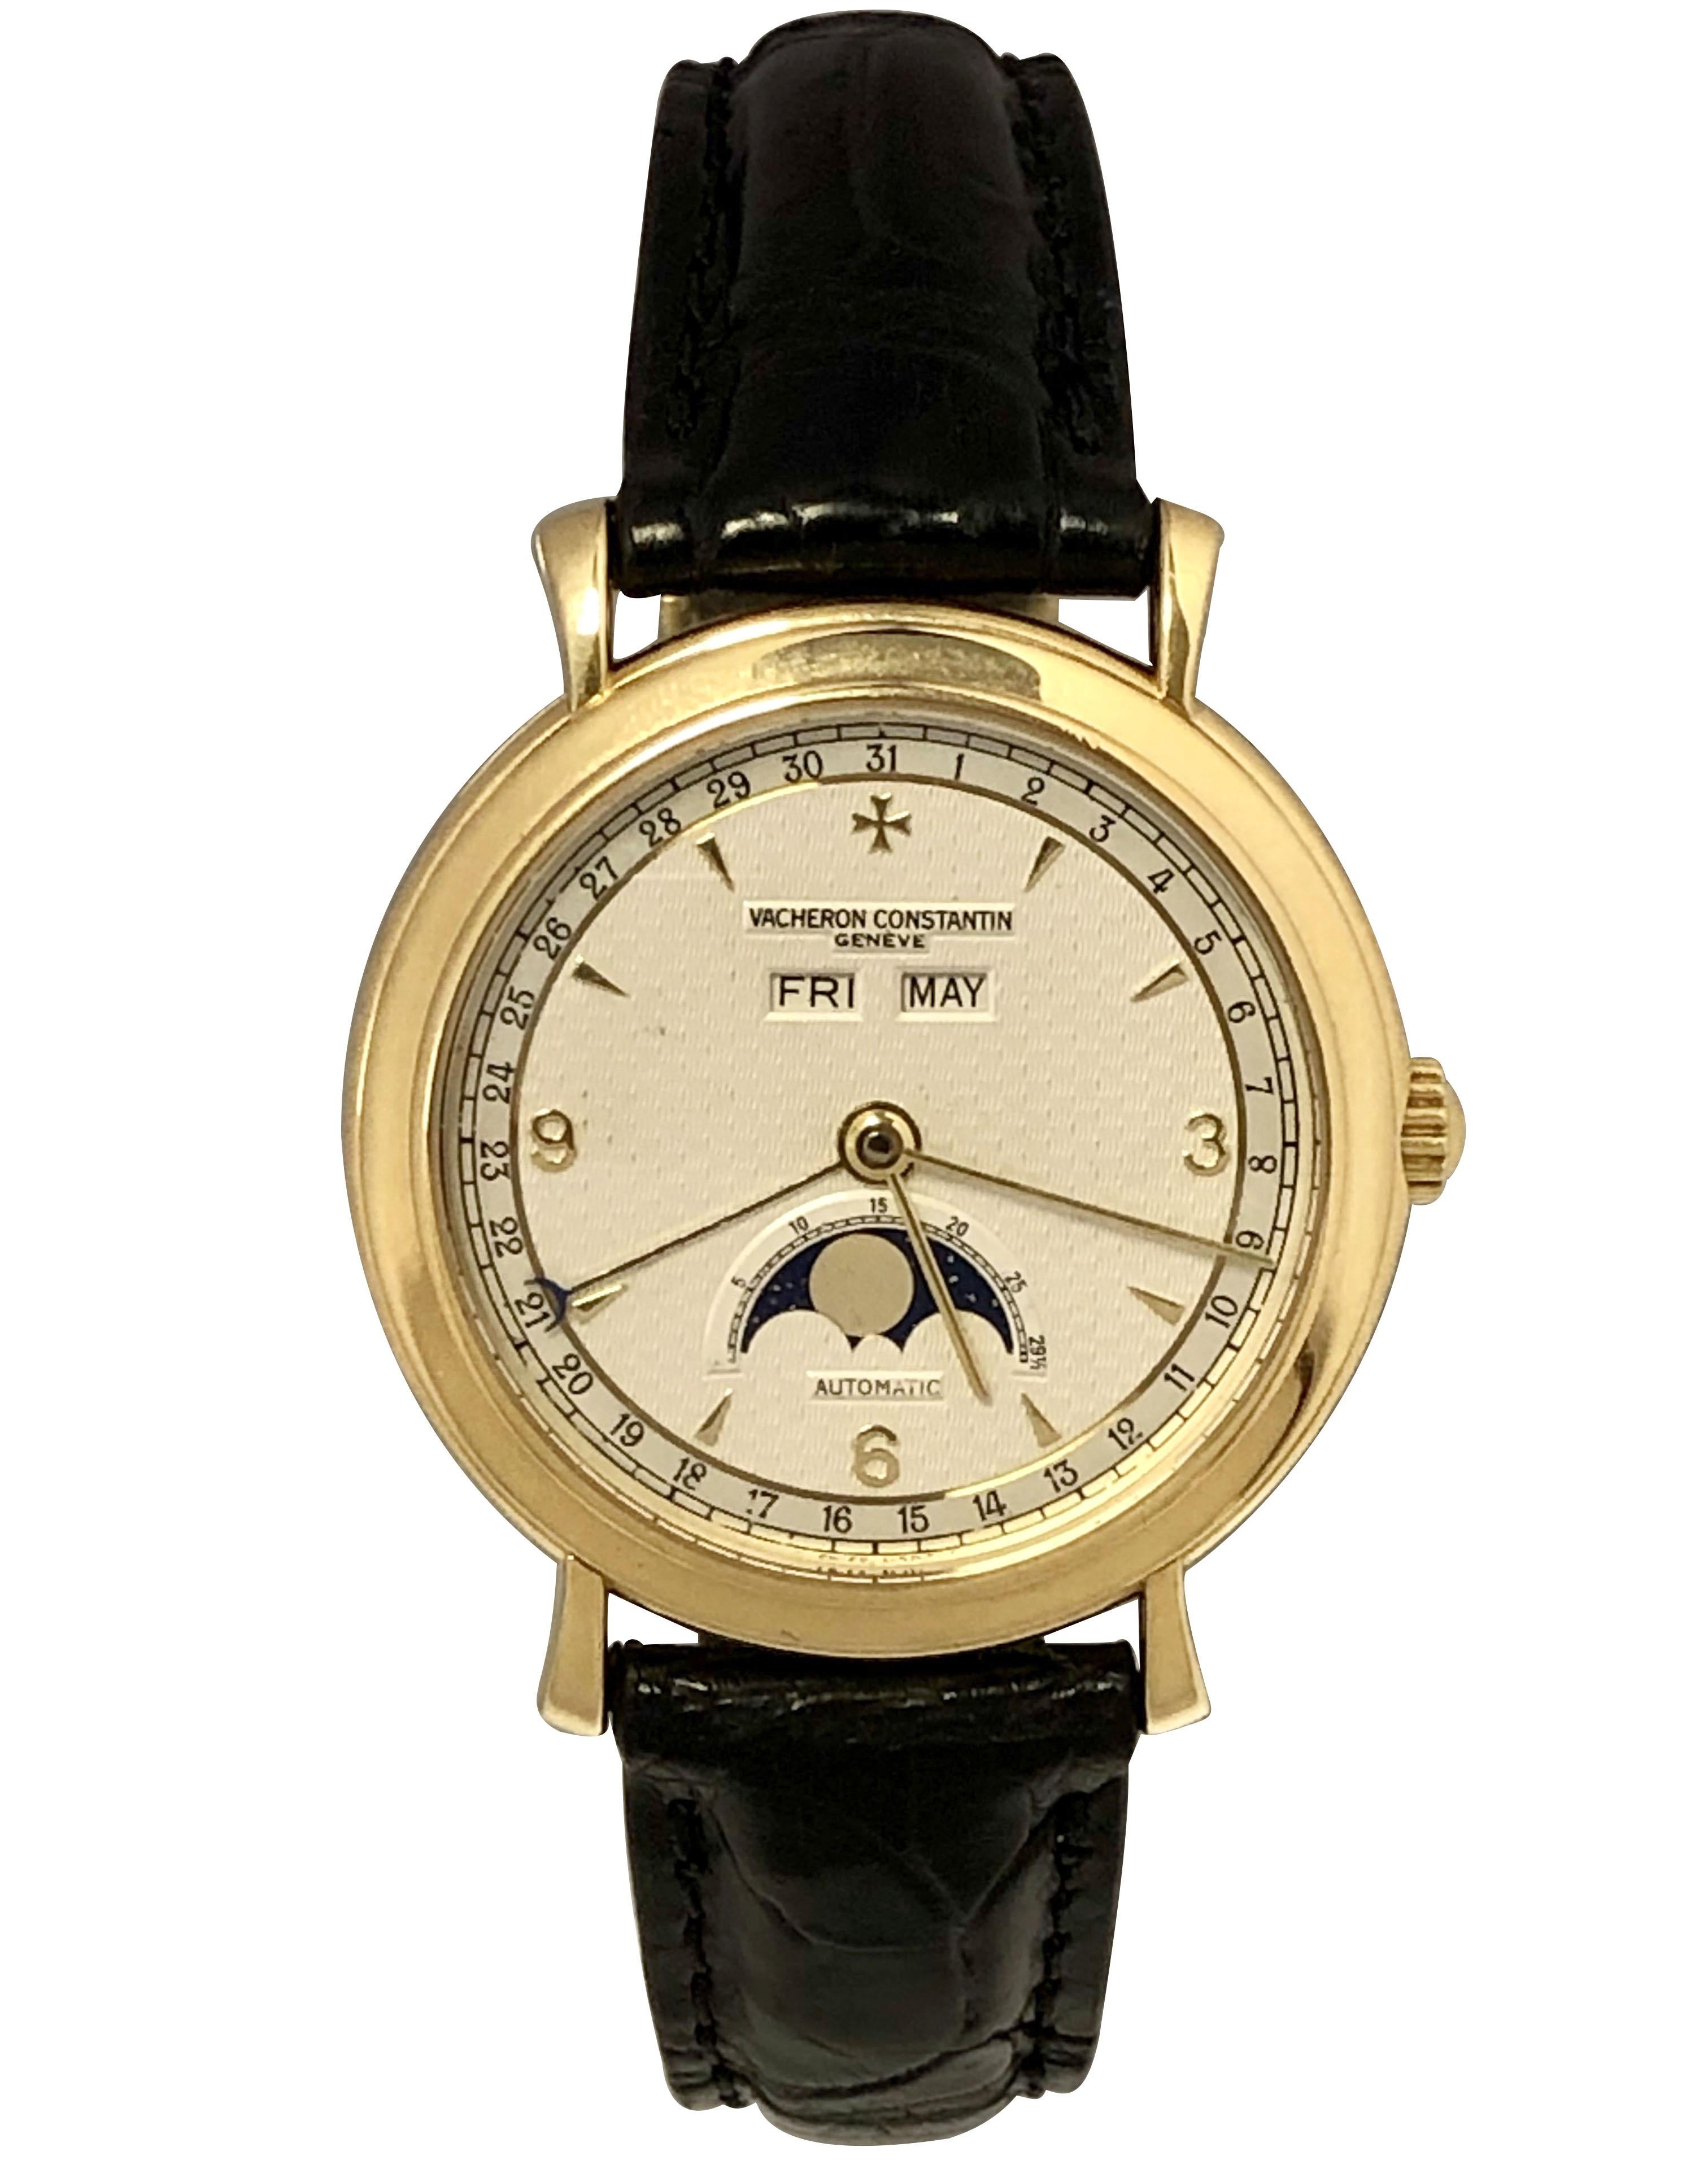 Vacheron Constantin Moonphase Triple Calendar Yellow Gold Wrist Watch Ref 47050 In Excellent Condition For Sale In Chicago, IL